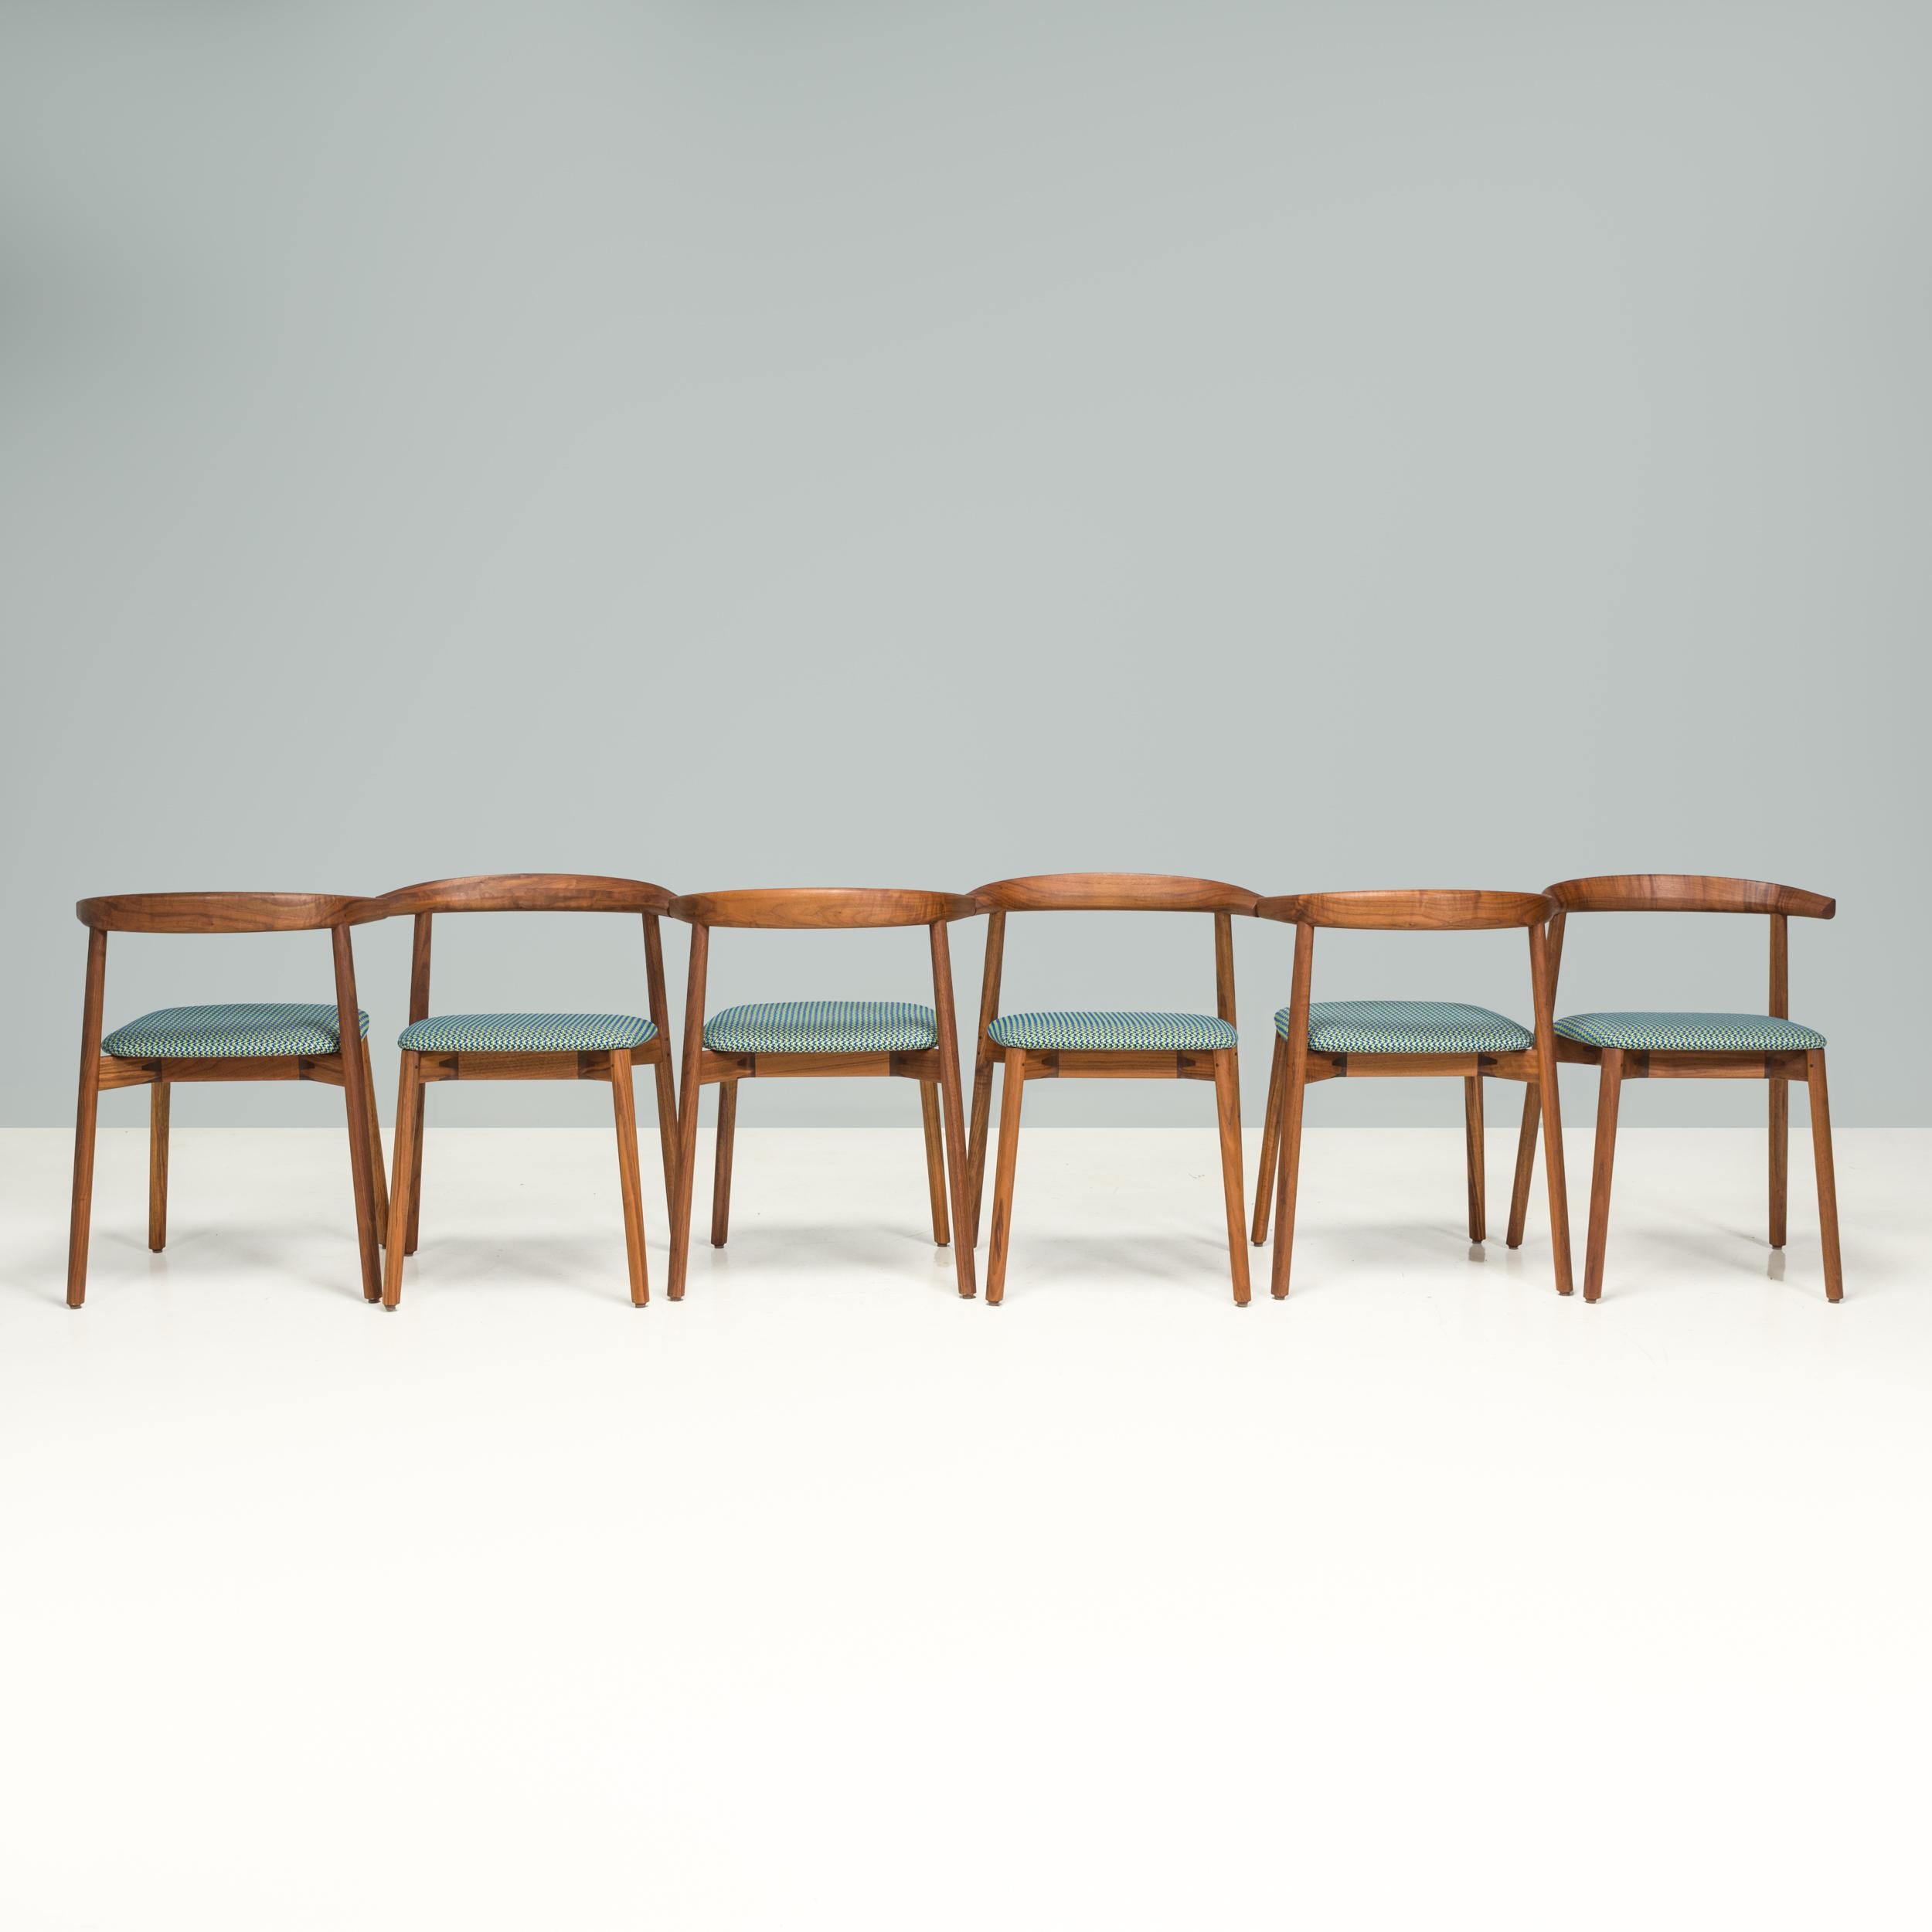 Designed and made by De La Espada in their factory in Portugal, the Ando dining chairs are a sleek, contemporary design.

Beautifully crafted, the chairs have a compact shape and are constructed from Danish oiled walnut.

With softly curved